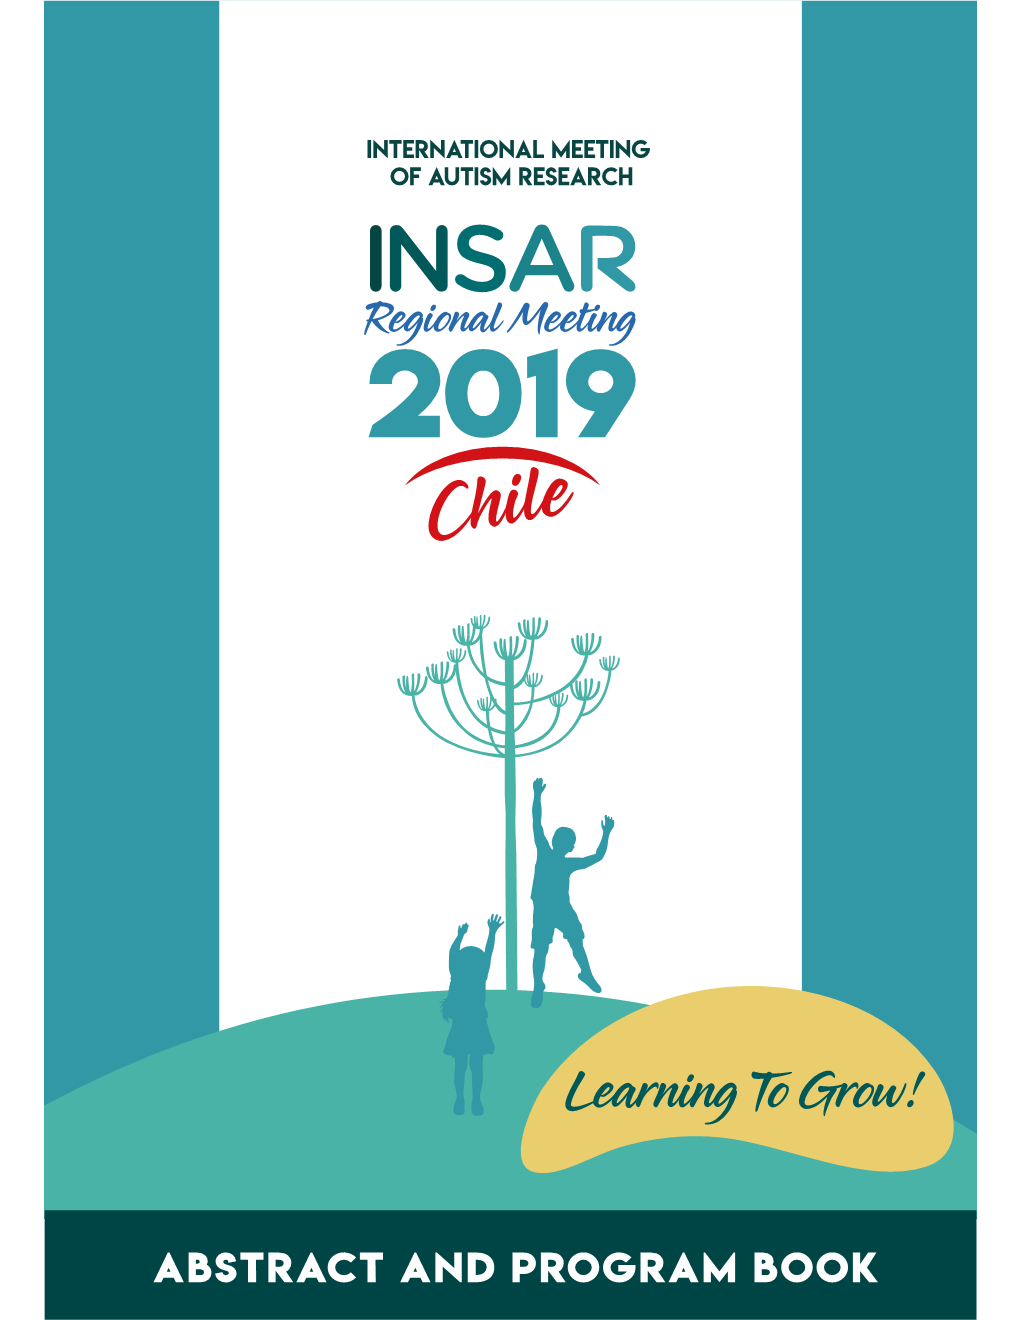 Chile 2019 INSAR Regional Meeting Program and Abstract Book